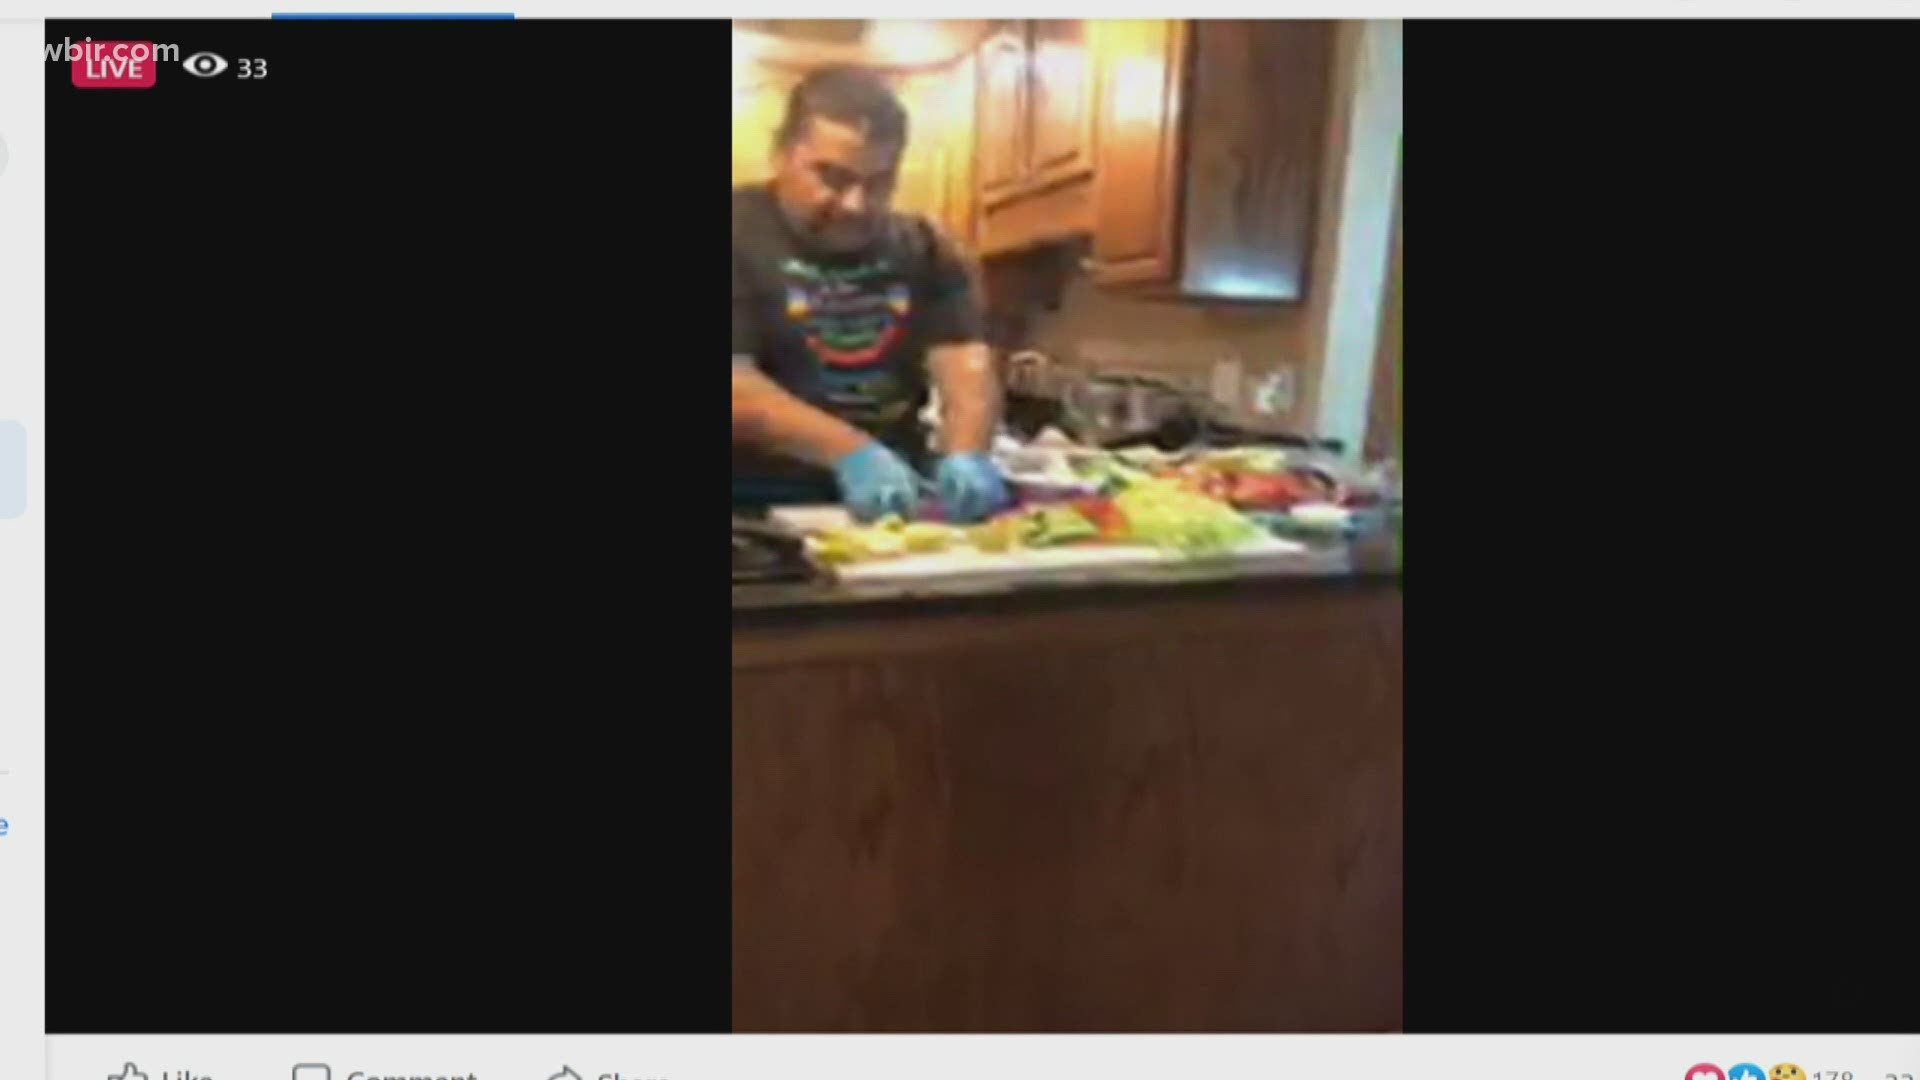 The owner of the "Nicest Place in America" held a virtual cooking class Wednesda night.